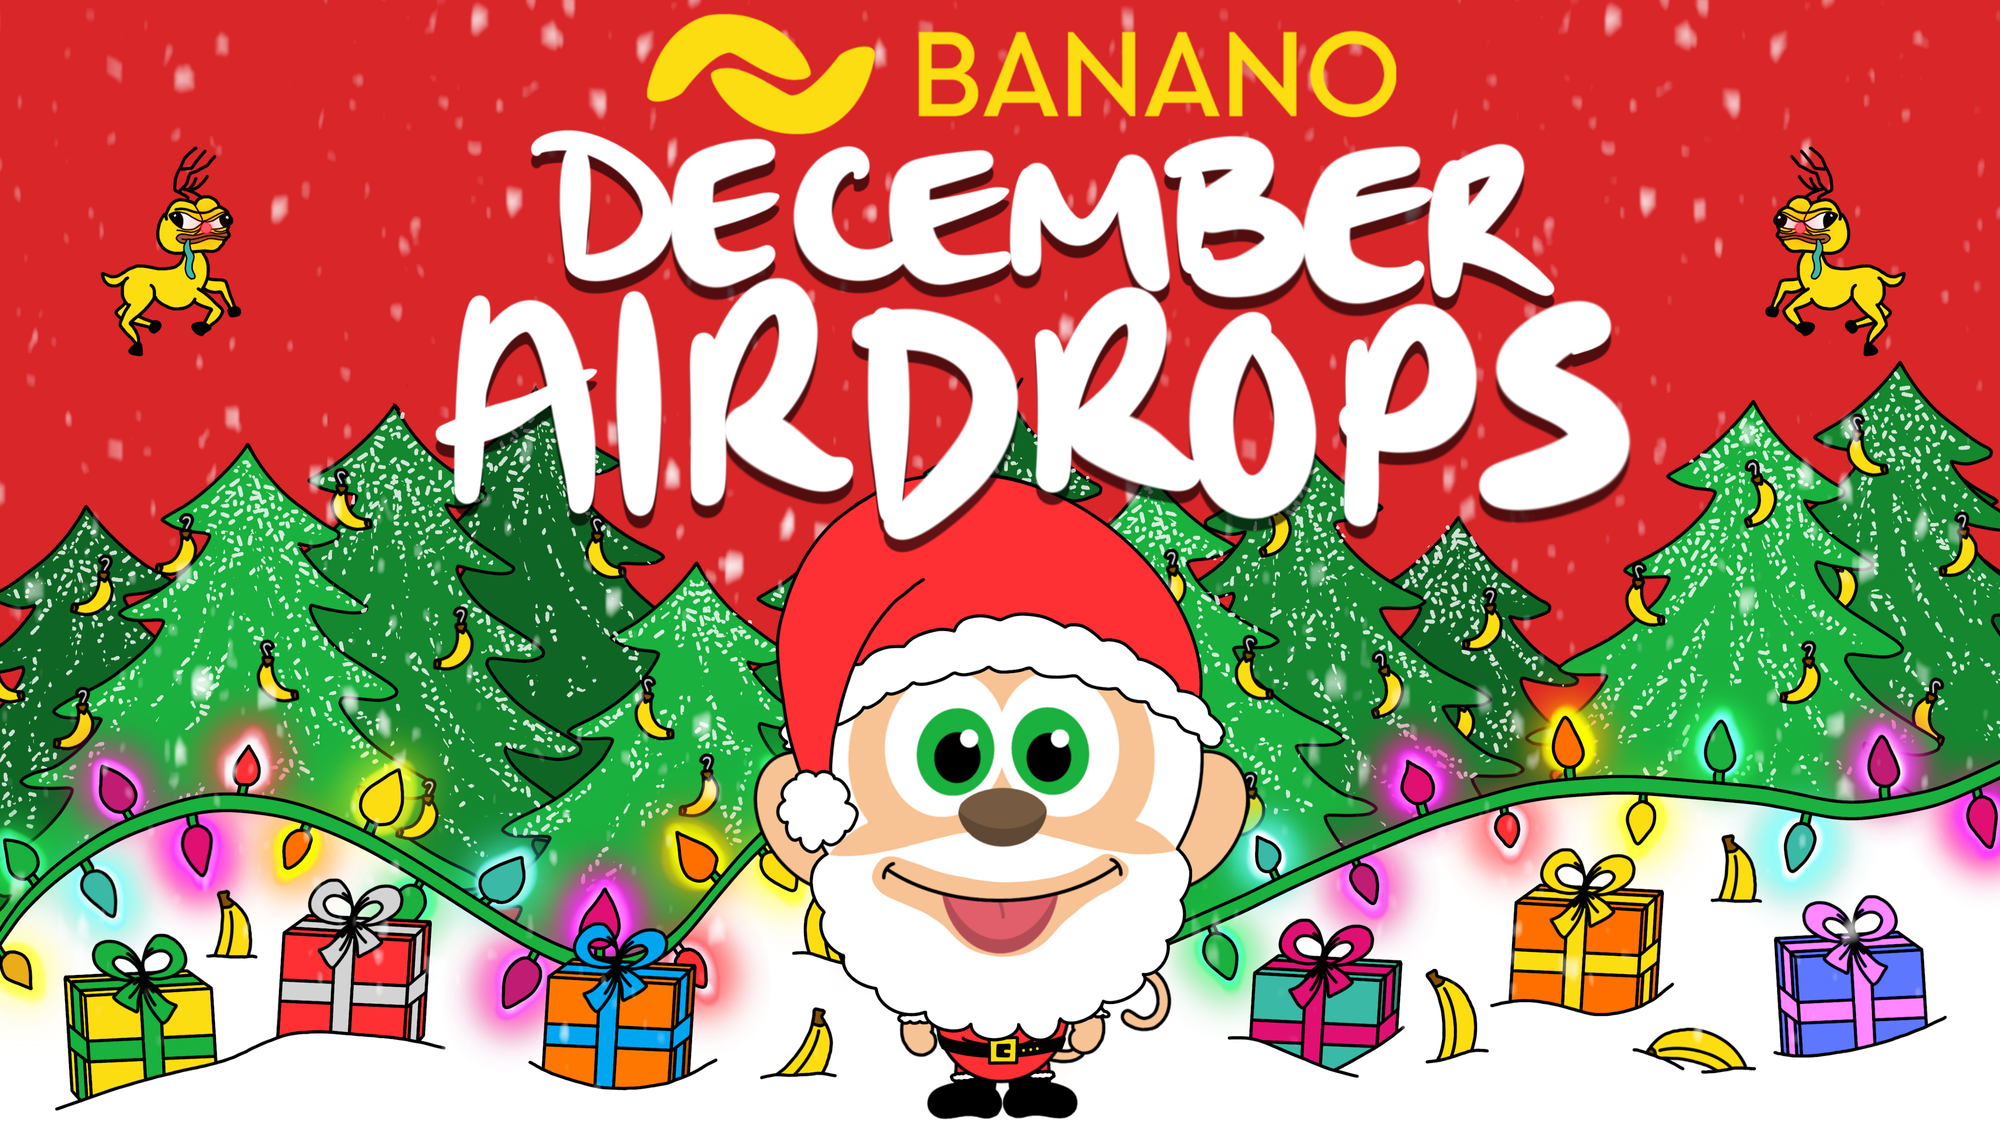 December Airdrops: BANANO Airdrop & free cryptomonKeys NFTs to all Twitter users!